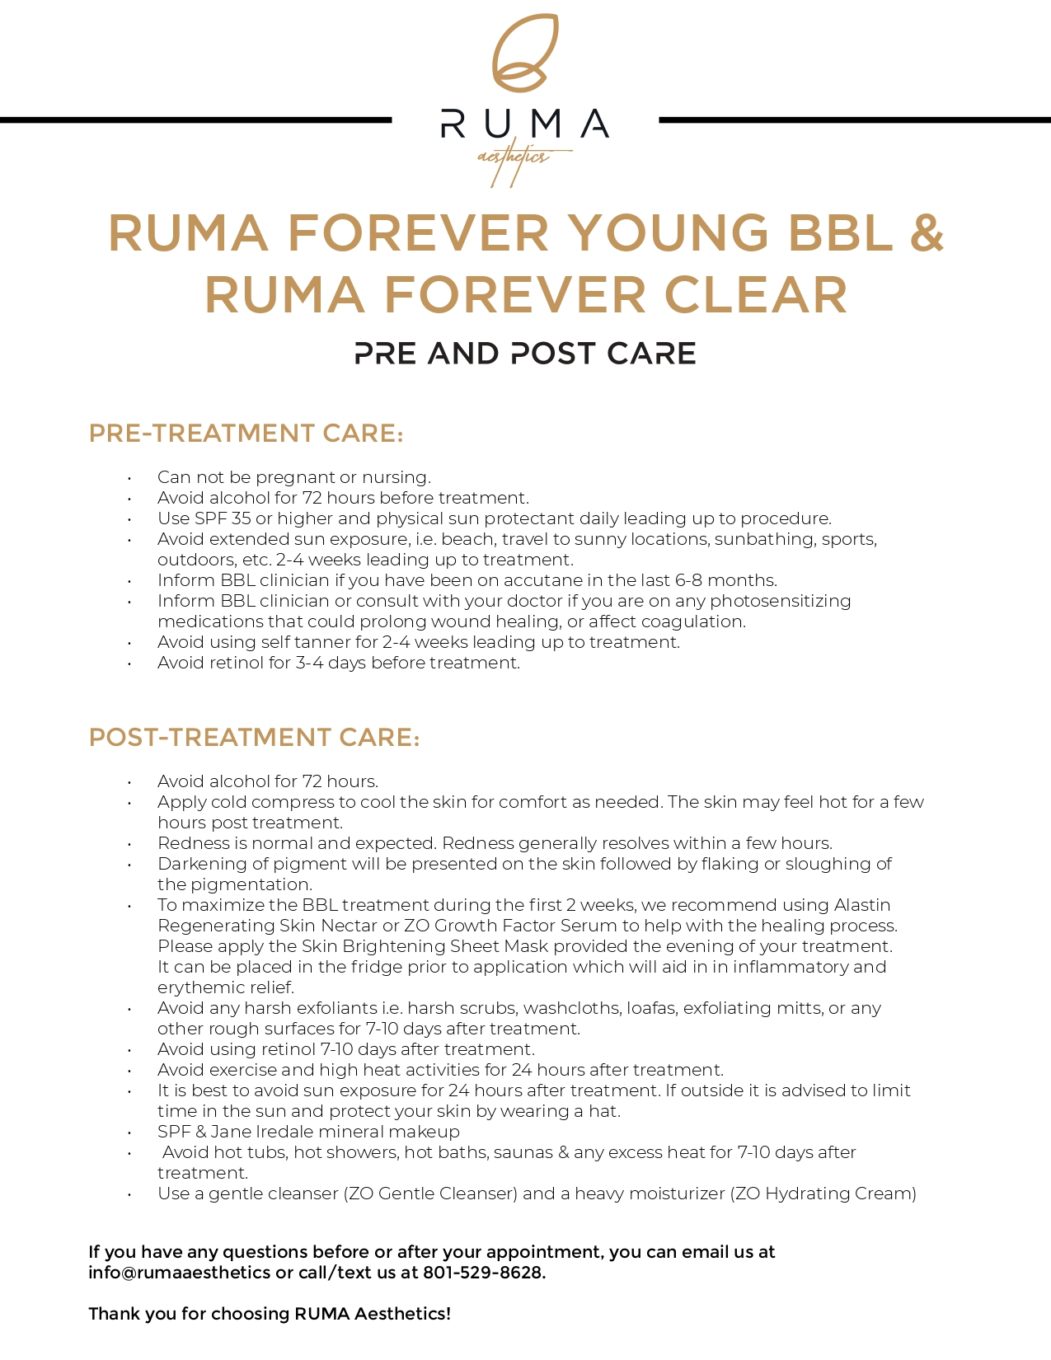 RUMA FOREVER YOUNG BBL & RUMA FOREVER CLEAR